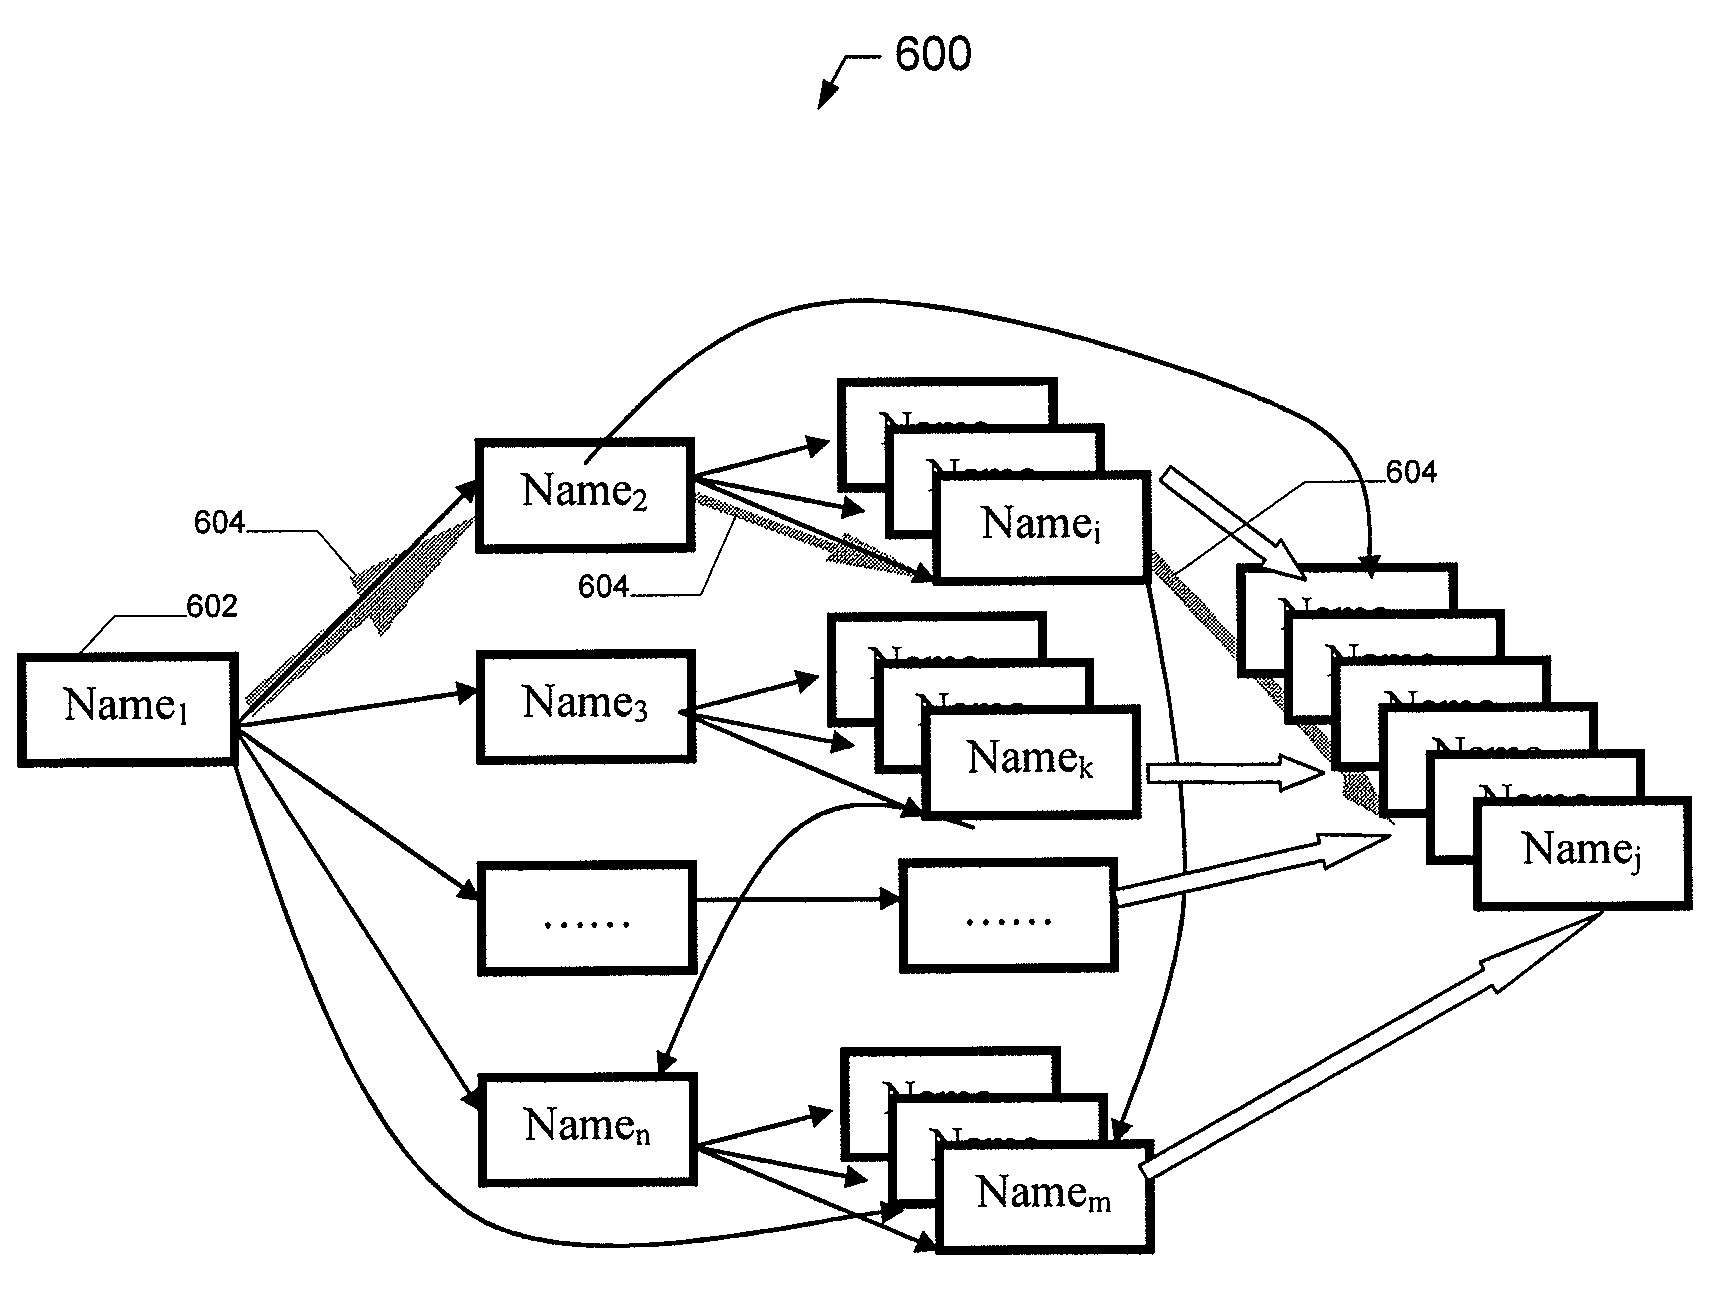 Methods, apparatuses, and computer program products for modeling contact networks